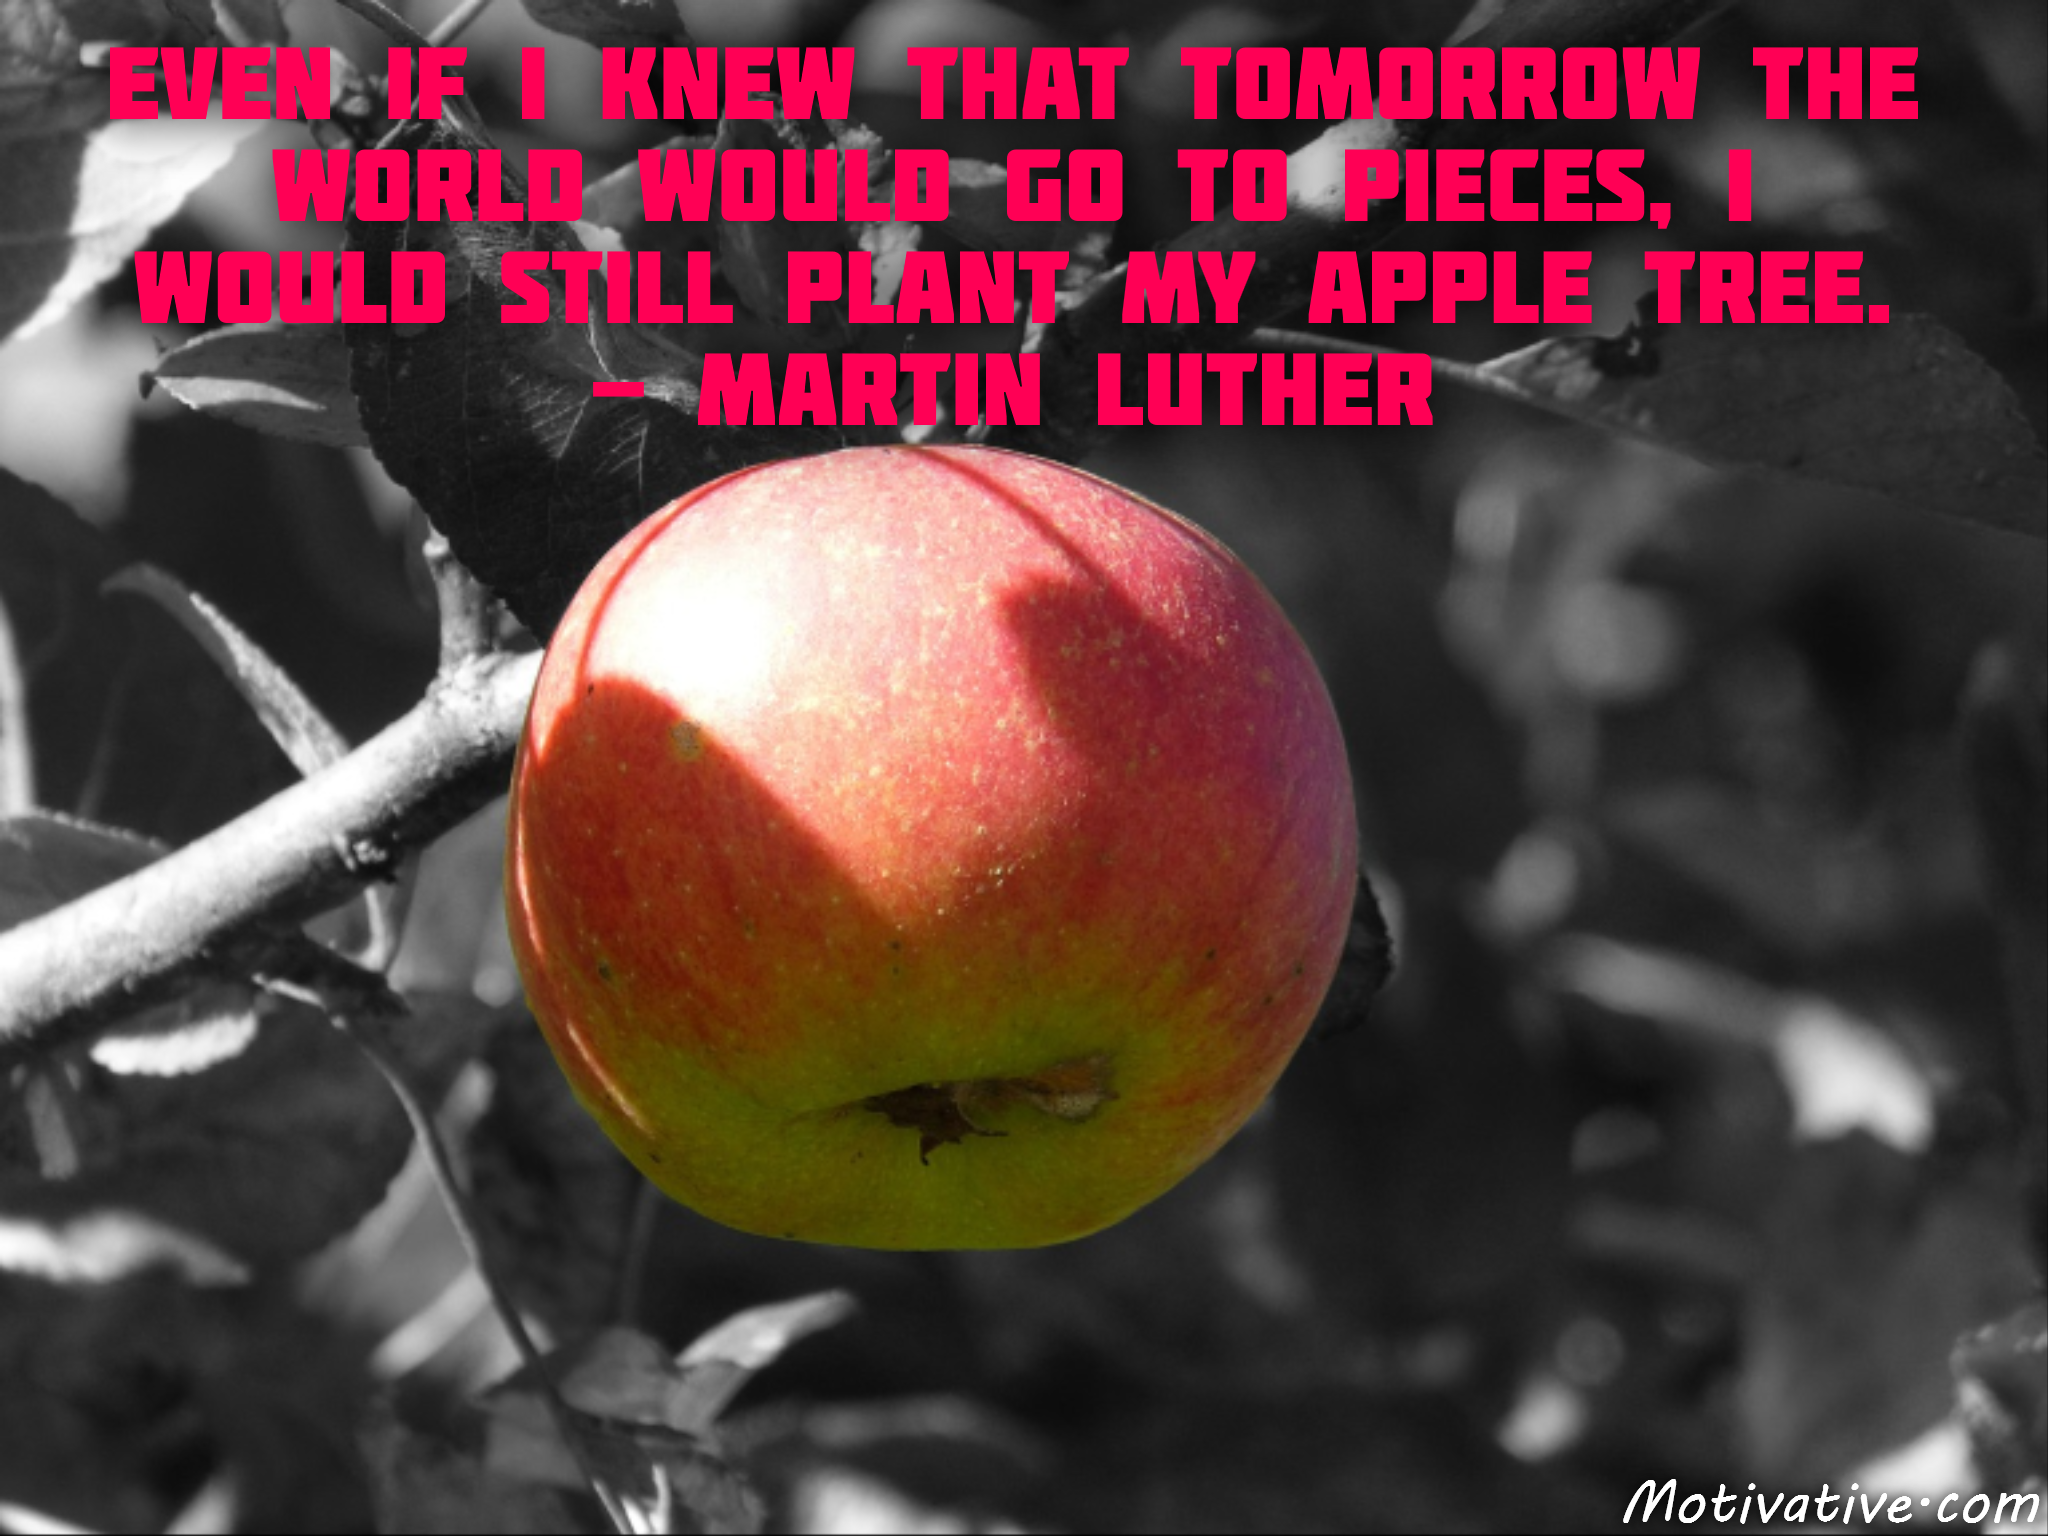 Even if I knew that tomorrow the world would go to pieces, I would still plant my apple tree. – Martin Luther